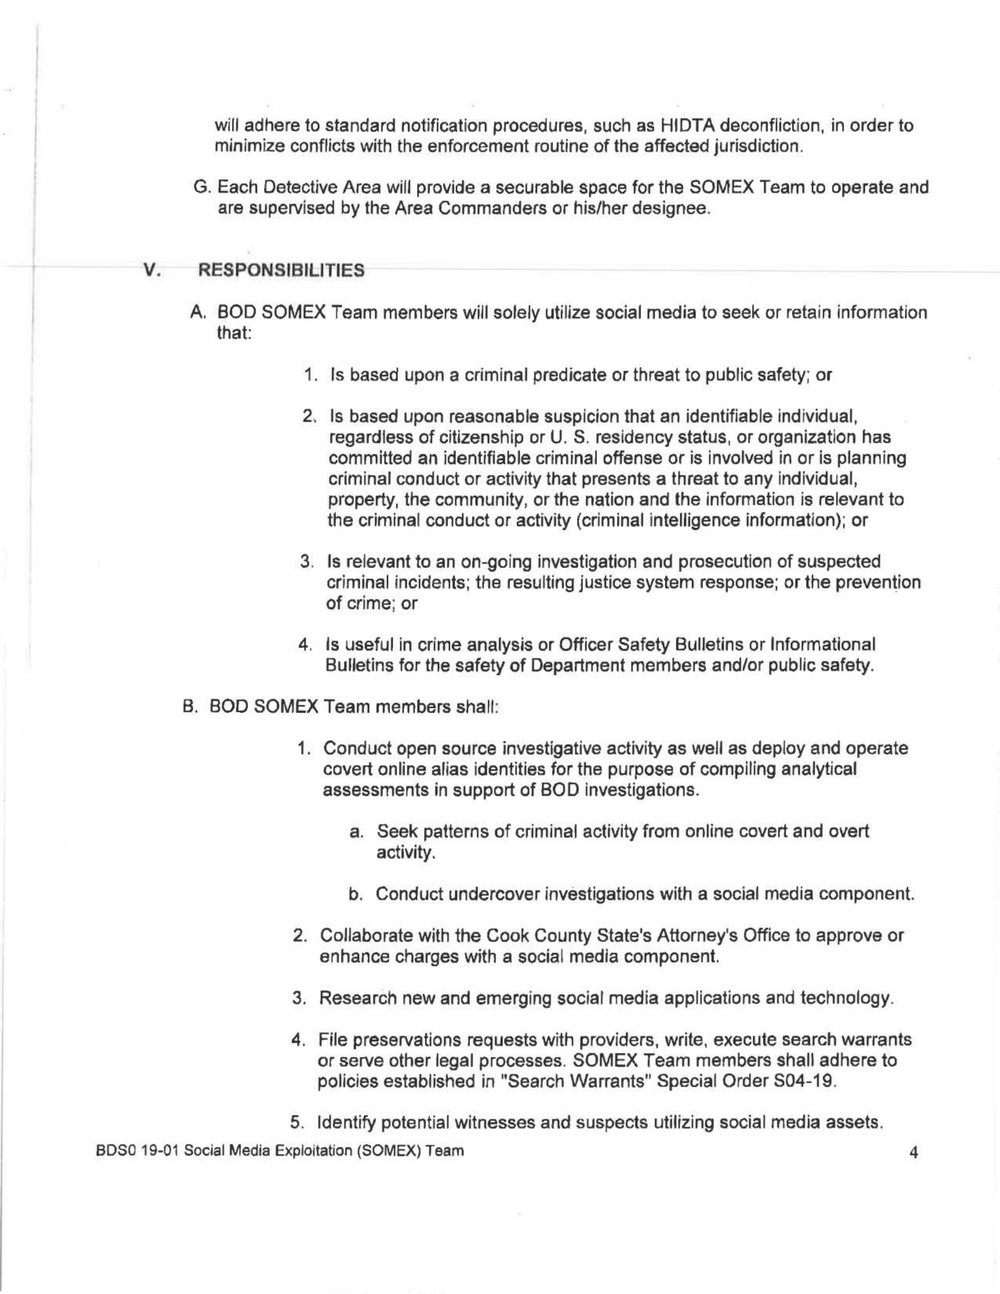 Page 4 from Chicago Police Social Media Exploitation Somex Policy